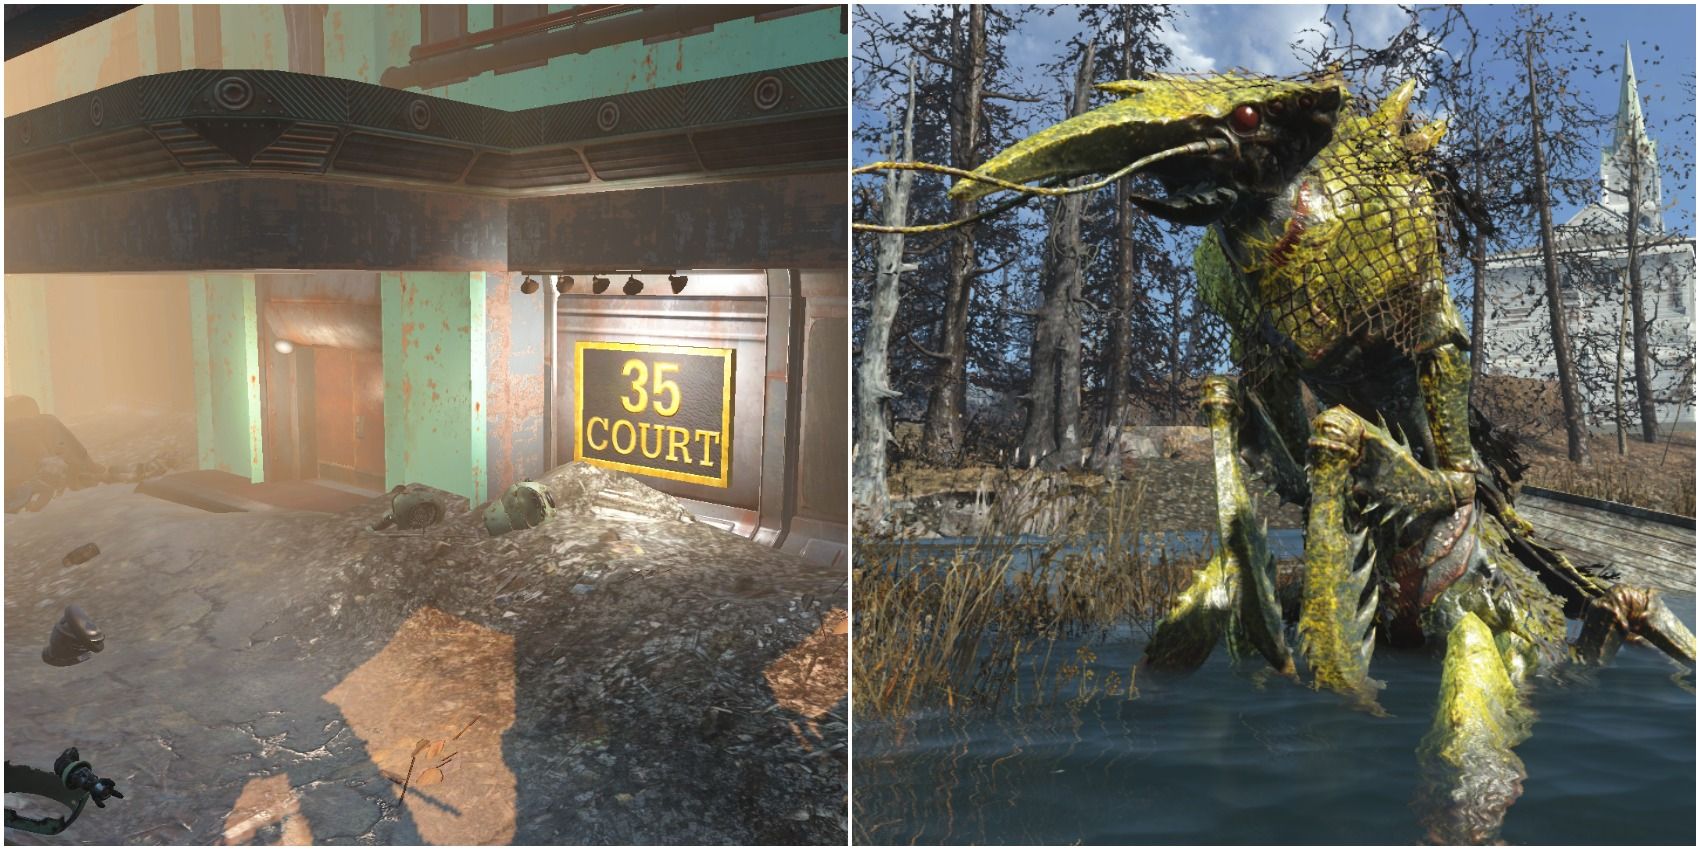 Fallout 4 toughest encounters in the game including 35 Court and Enraged Fog Crawler.